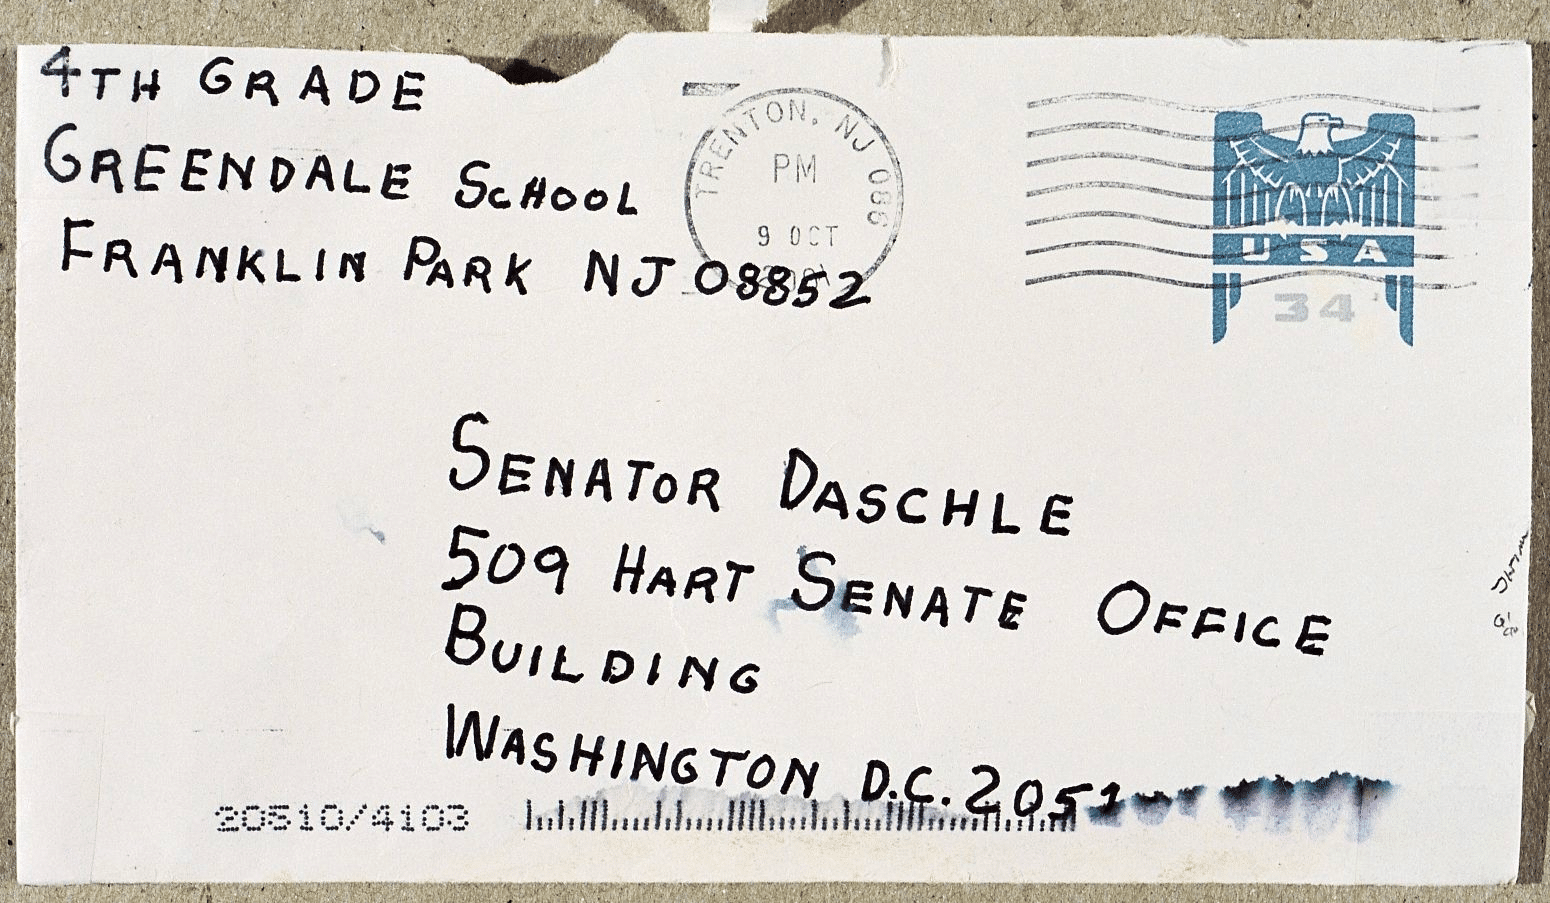 Former US senator Tom Daschle was sent a letter laced with anthrax.